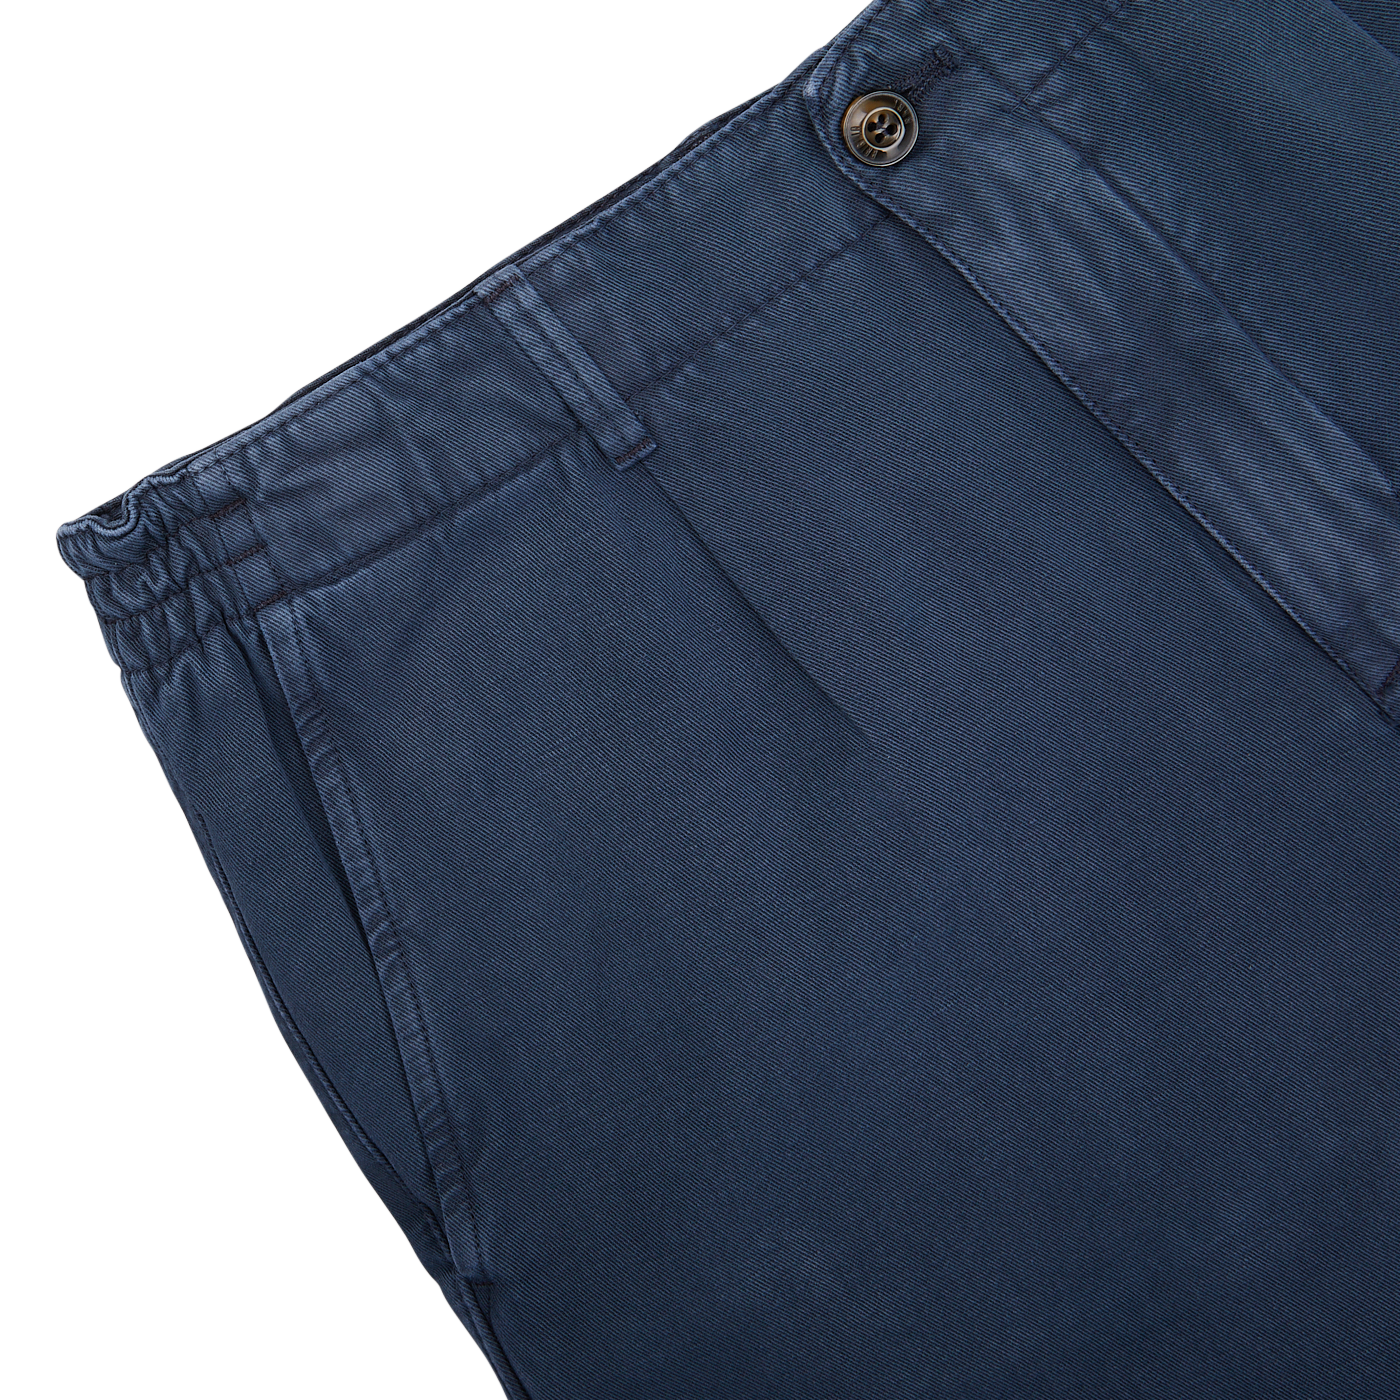 Part of a Briglia navy blue pair of shorts with an adjustable waistband and a button closure.